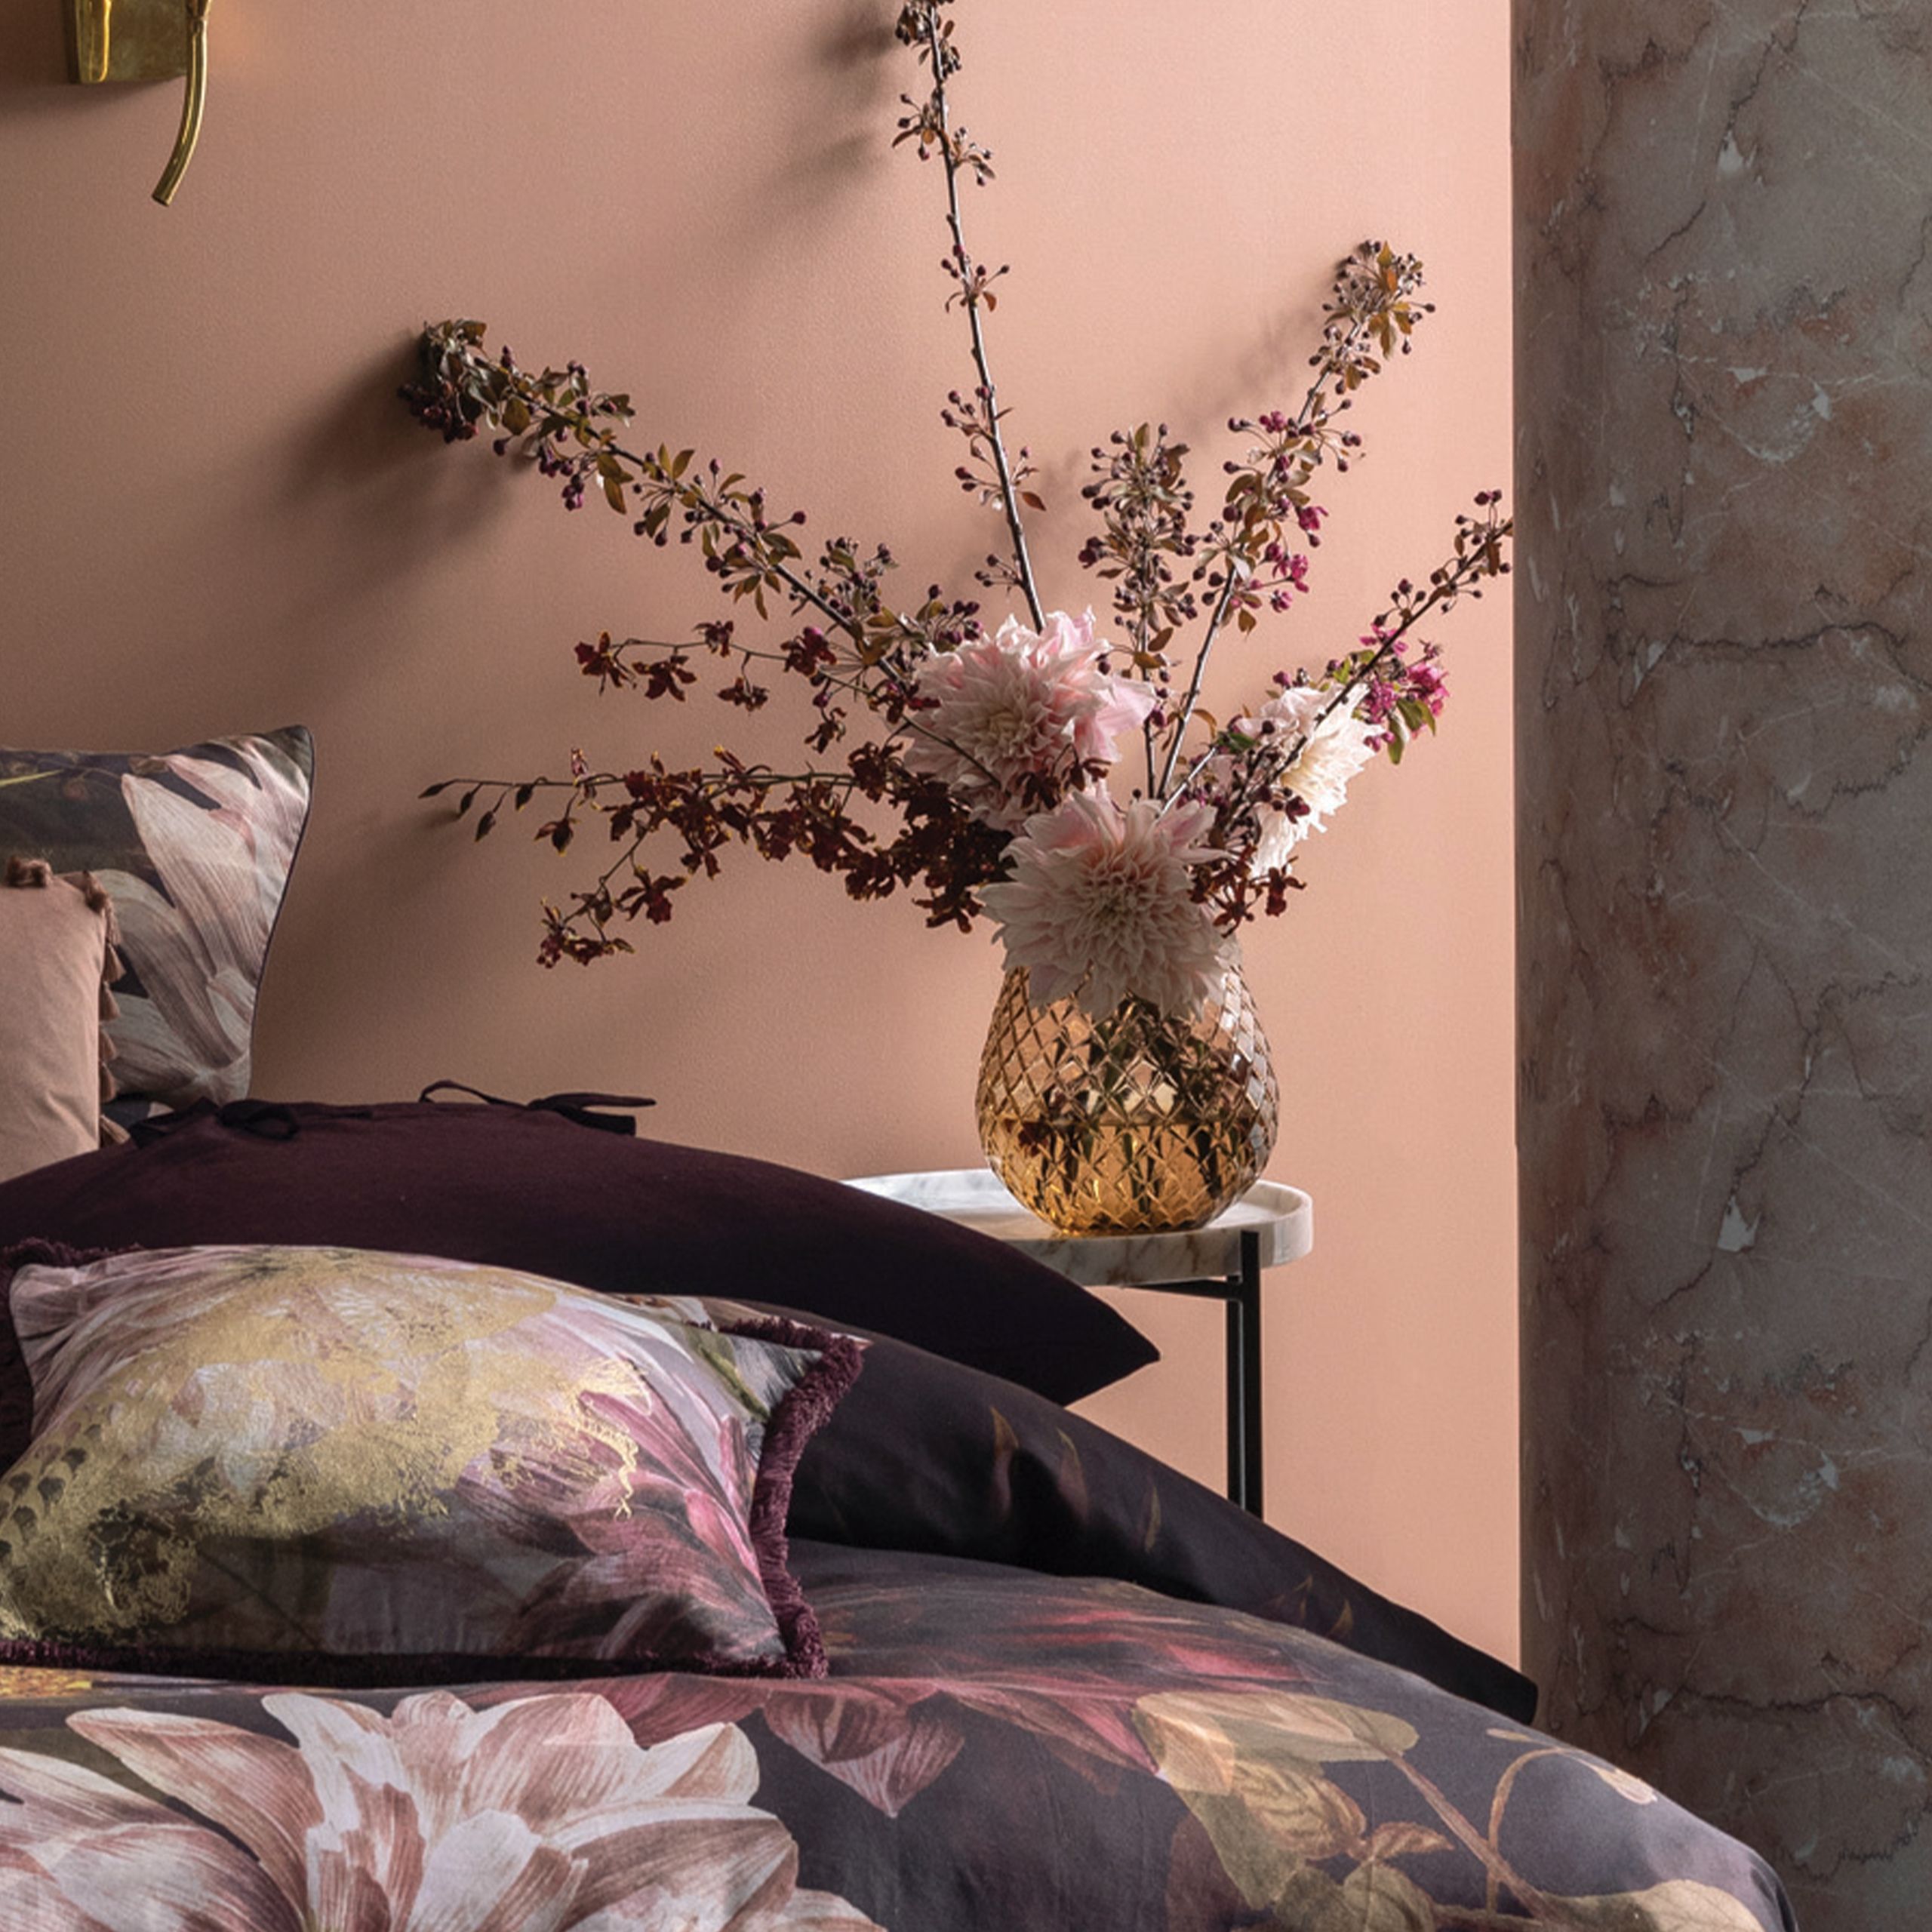 Dark and serene, a stunning floral, embodying a style that has become a signature look from our studio. This Dutch Masters inspired print features an array of foliage and tropical flora in the most delicious and richly saturated shades of plum and wine. Printed on a cotton sateen, this luxurious story is brought to life with tactile printed velvet and gold accented accessories.